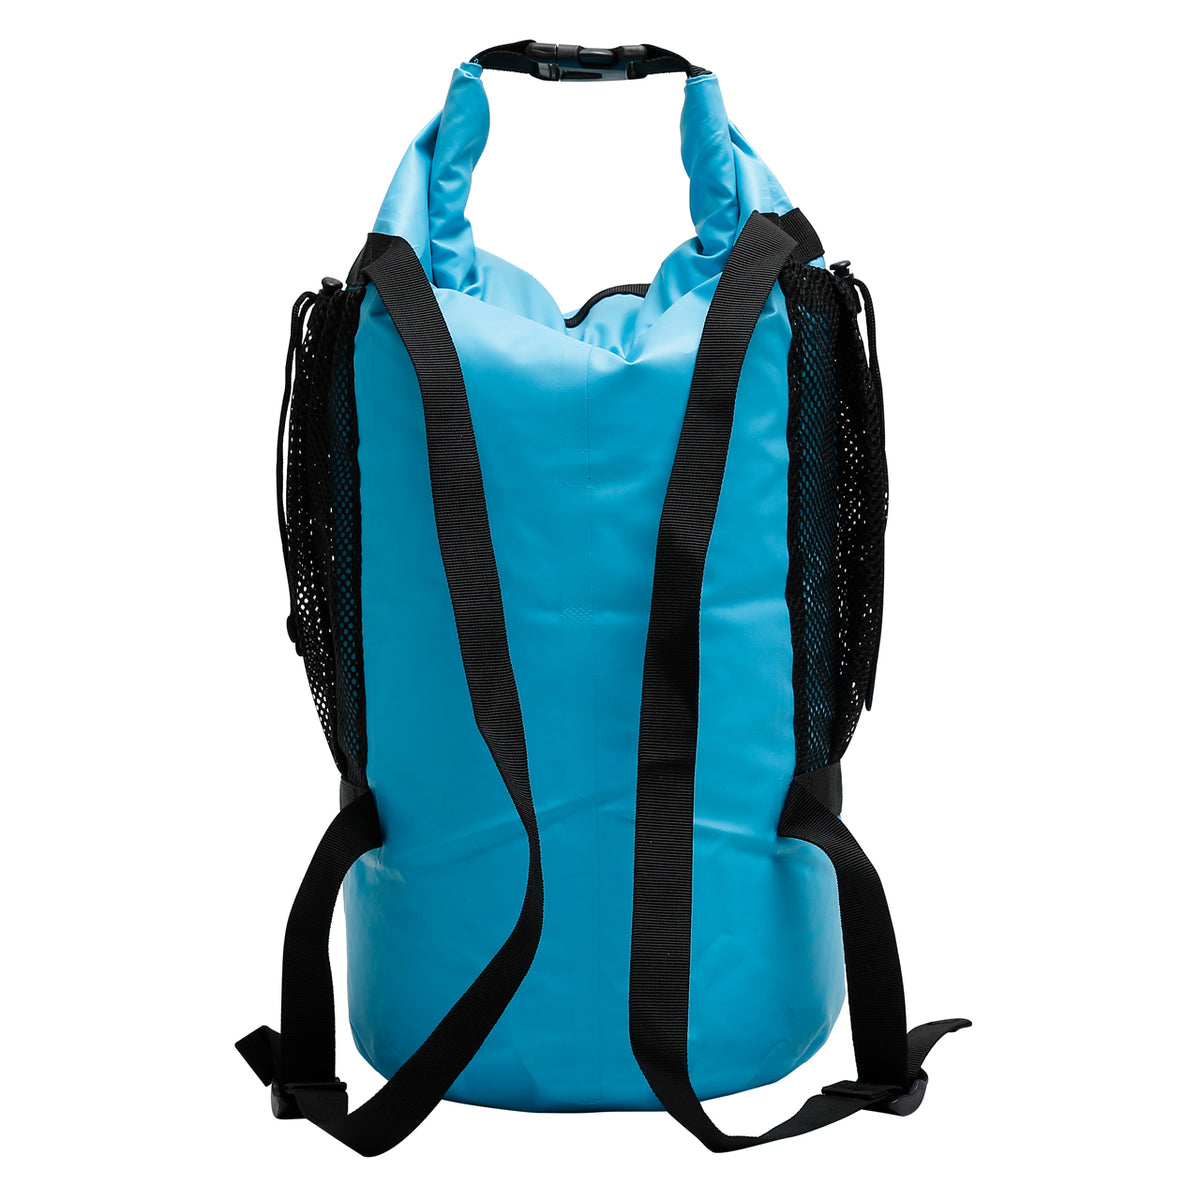 Rear view of the TrailGear 20 liter Dry Bag Back Pack with Netted Pockets in the sky blue variation.